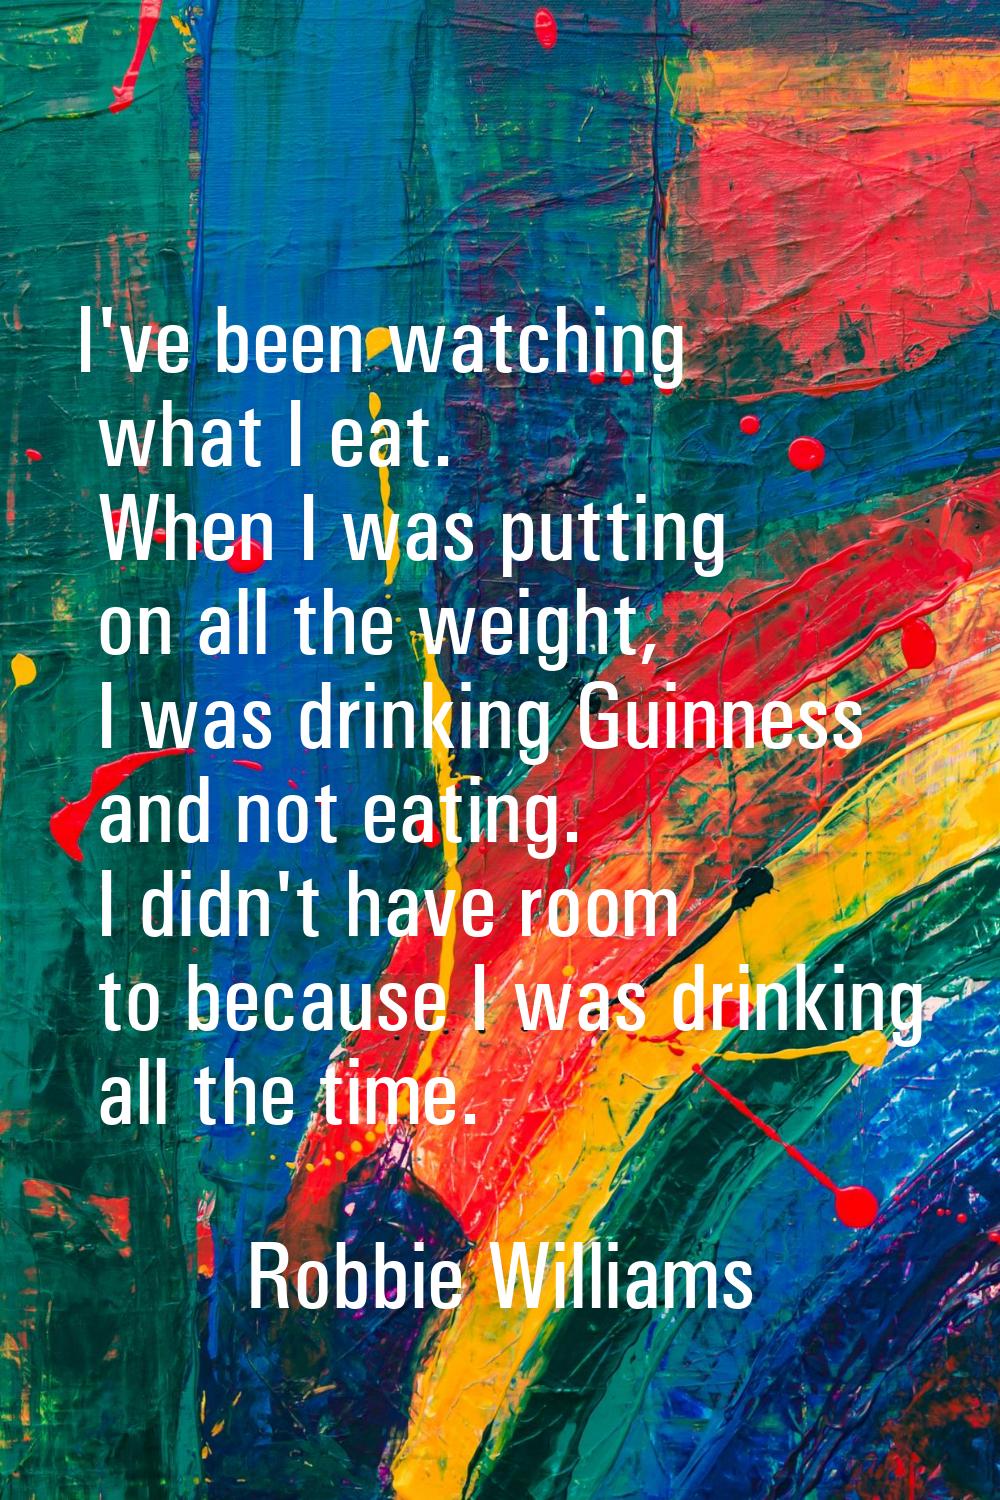 I've been watching what I eat. When I was putting on all the weight, I was drinking Guinness and no